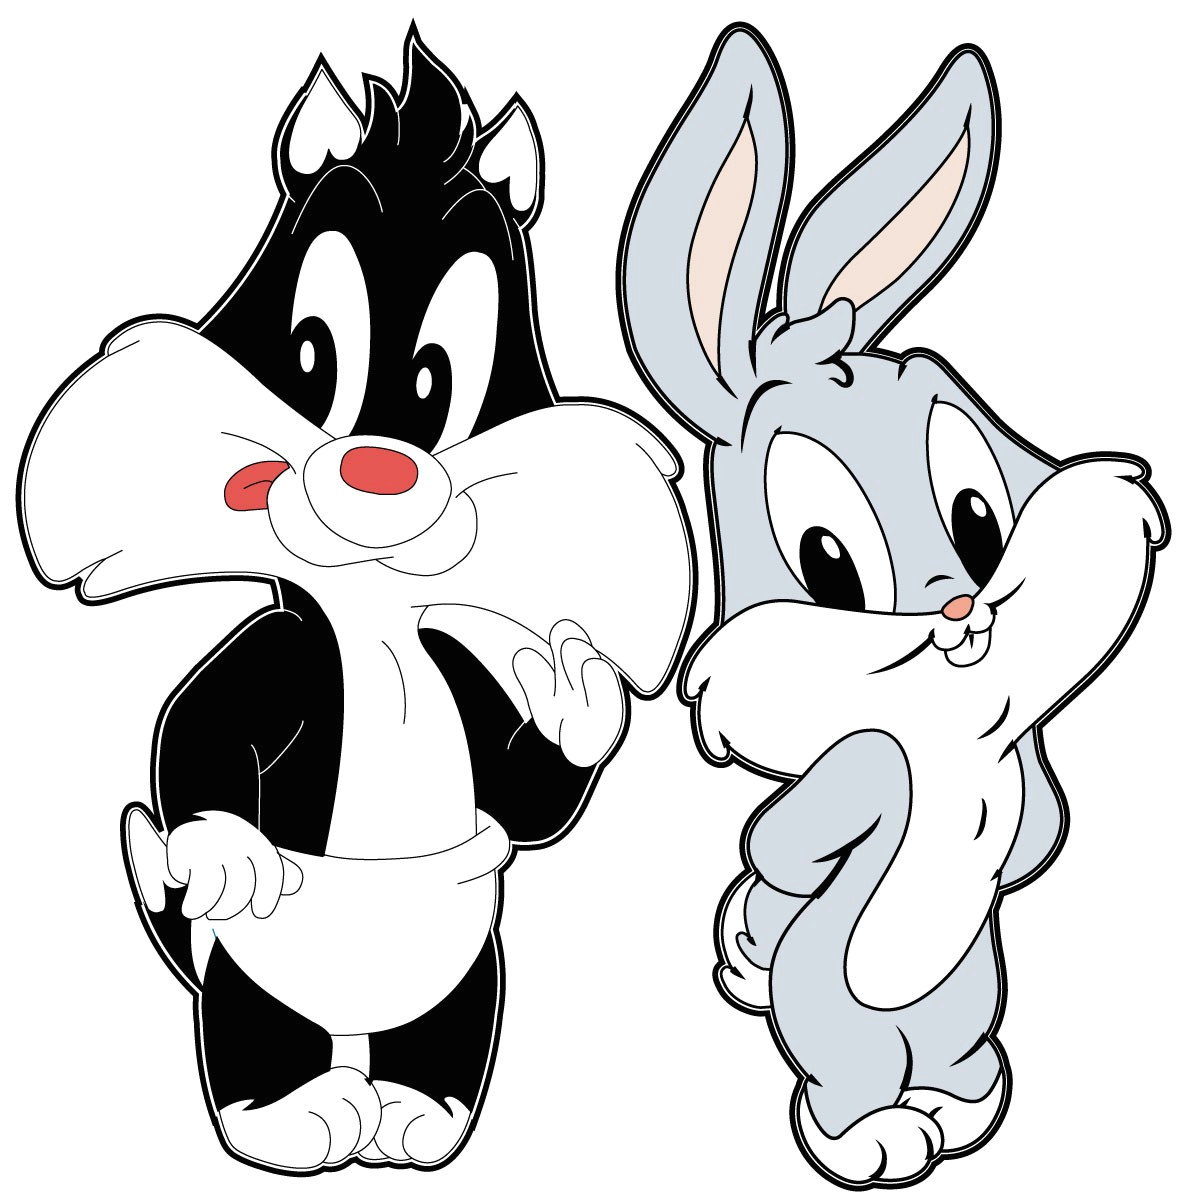 Drawing A Cartoon Bugs Free Bunny Cartoon Images Download Free Clip Art Free Clip Art On